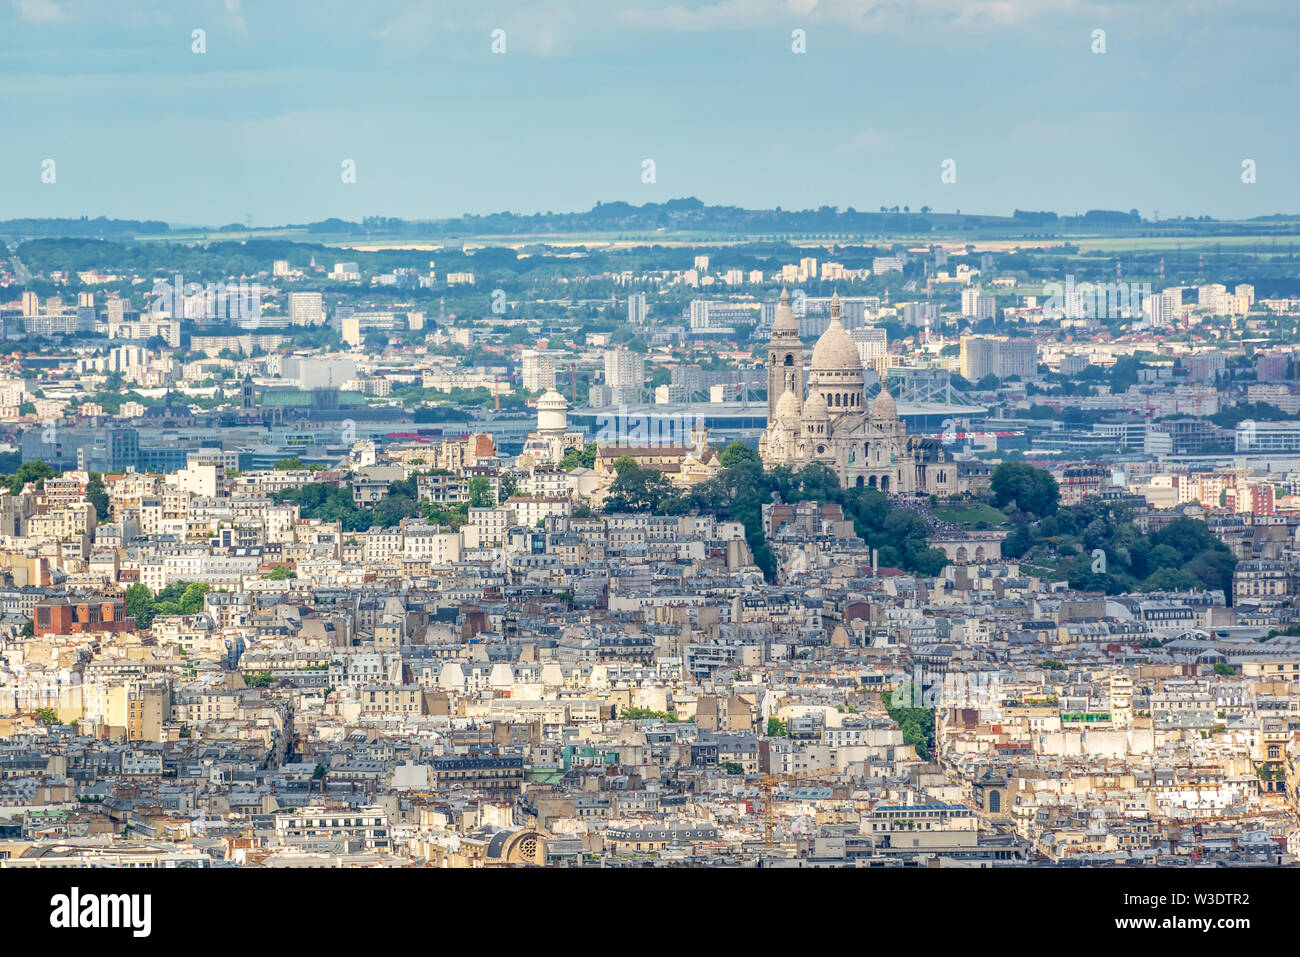 Aerial view of  Montmartre with Sacre-Coeur Basilica  in Paris France Stock Photo